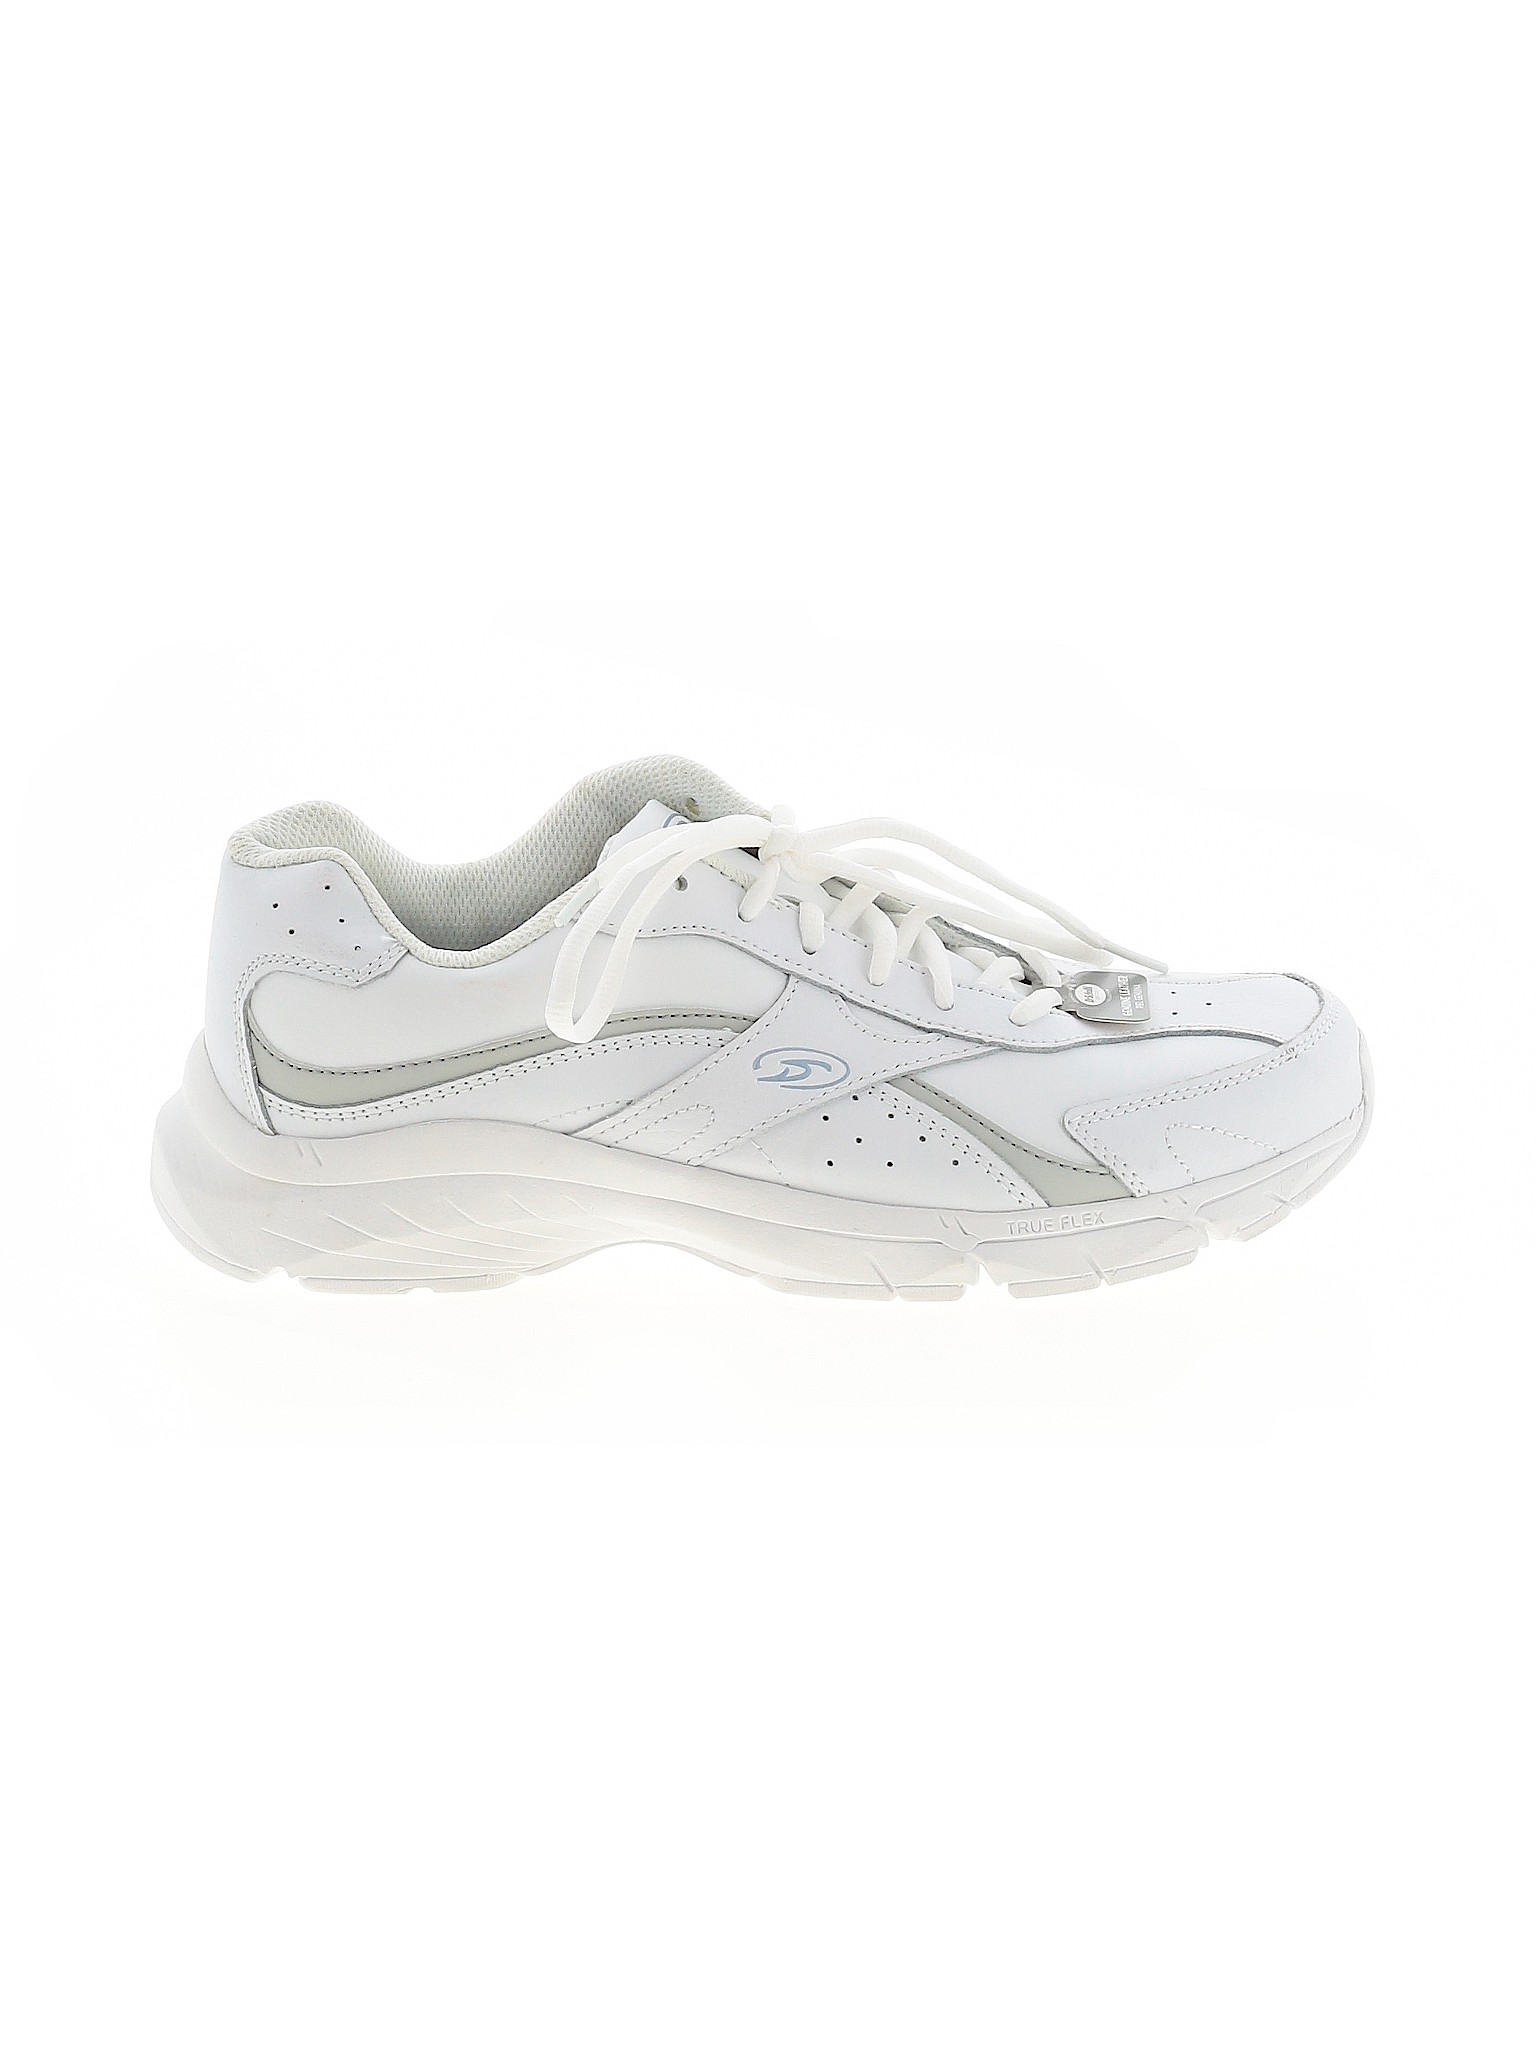 dr scholl's white sneakers